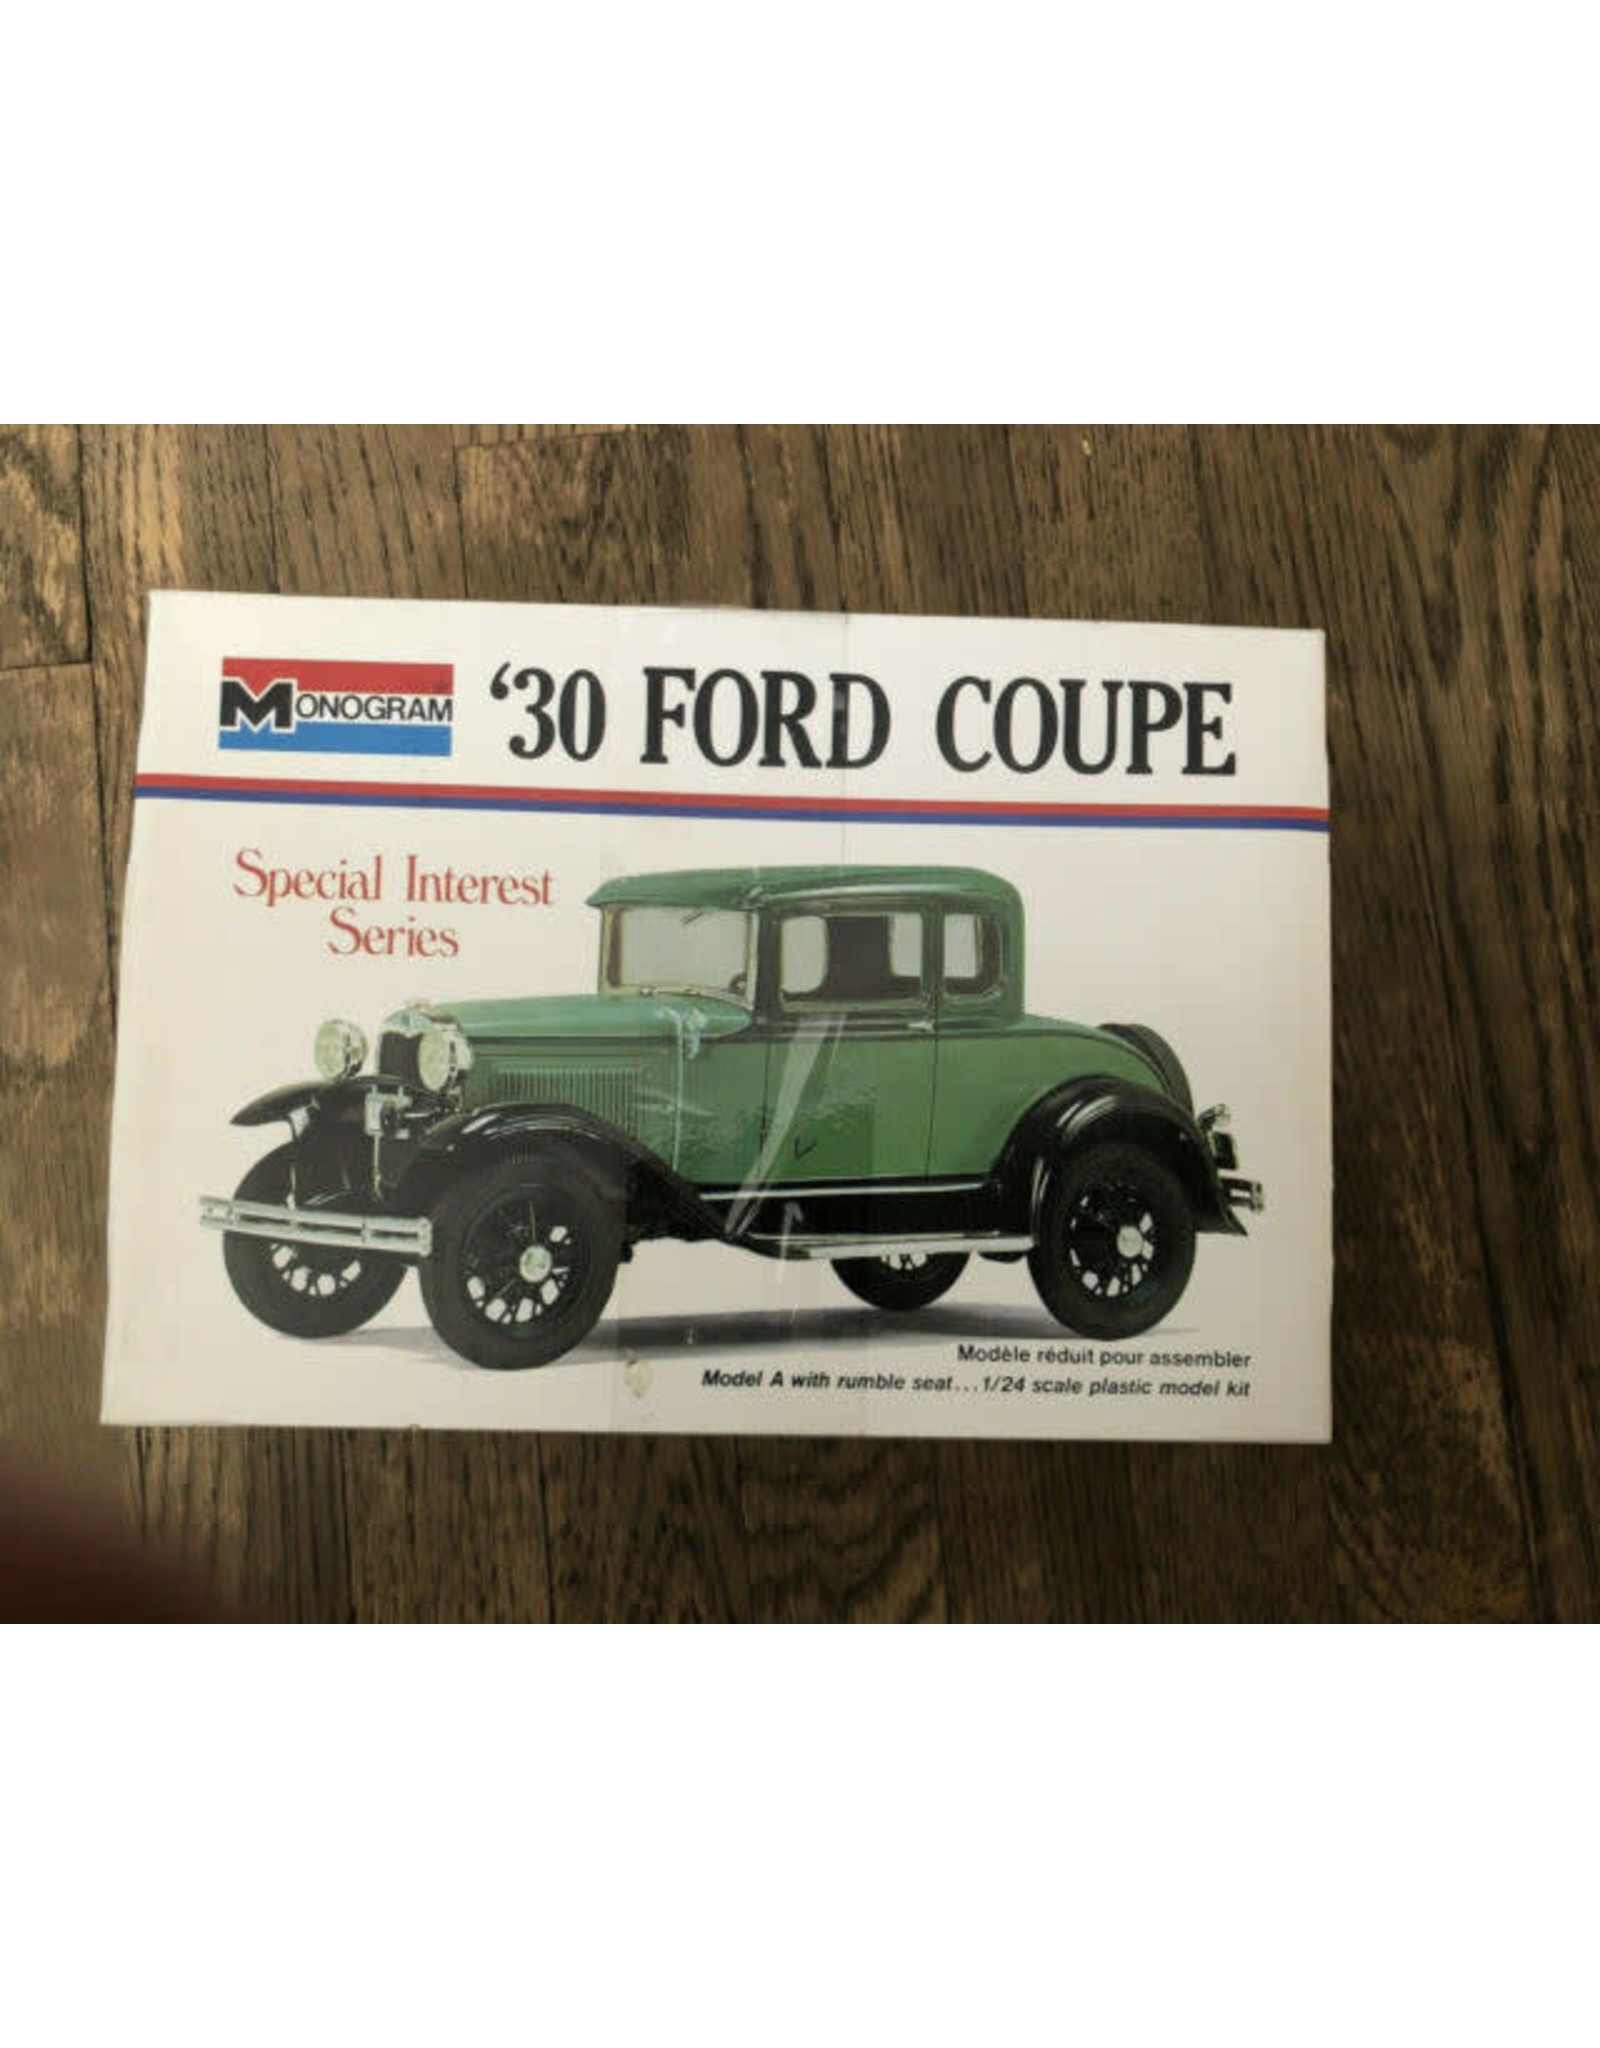 Monogram 30 Ford Coupe Model 1/24 Scale